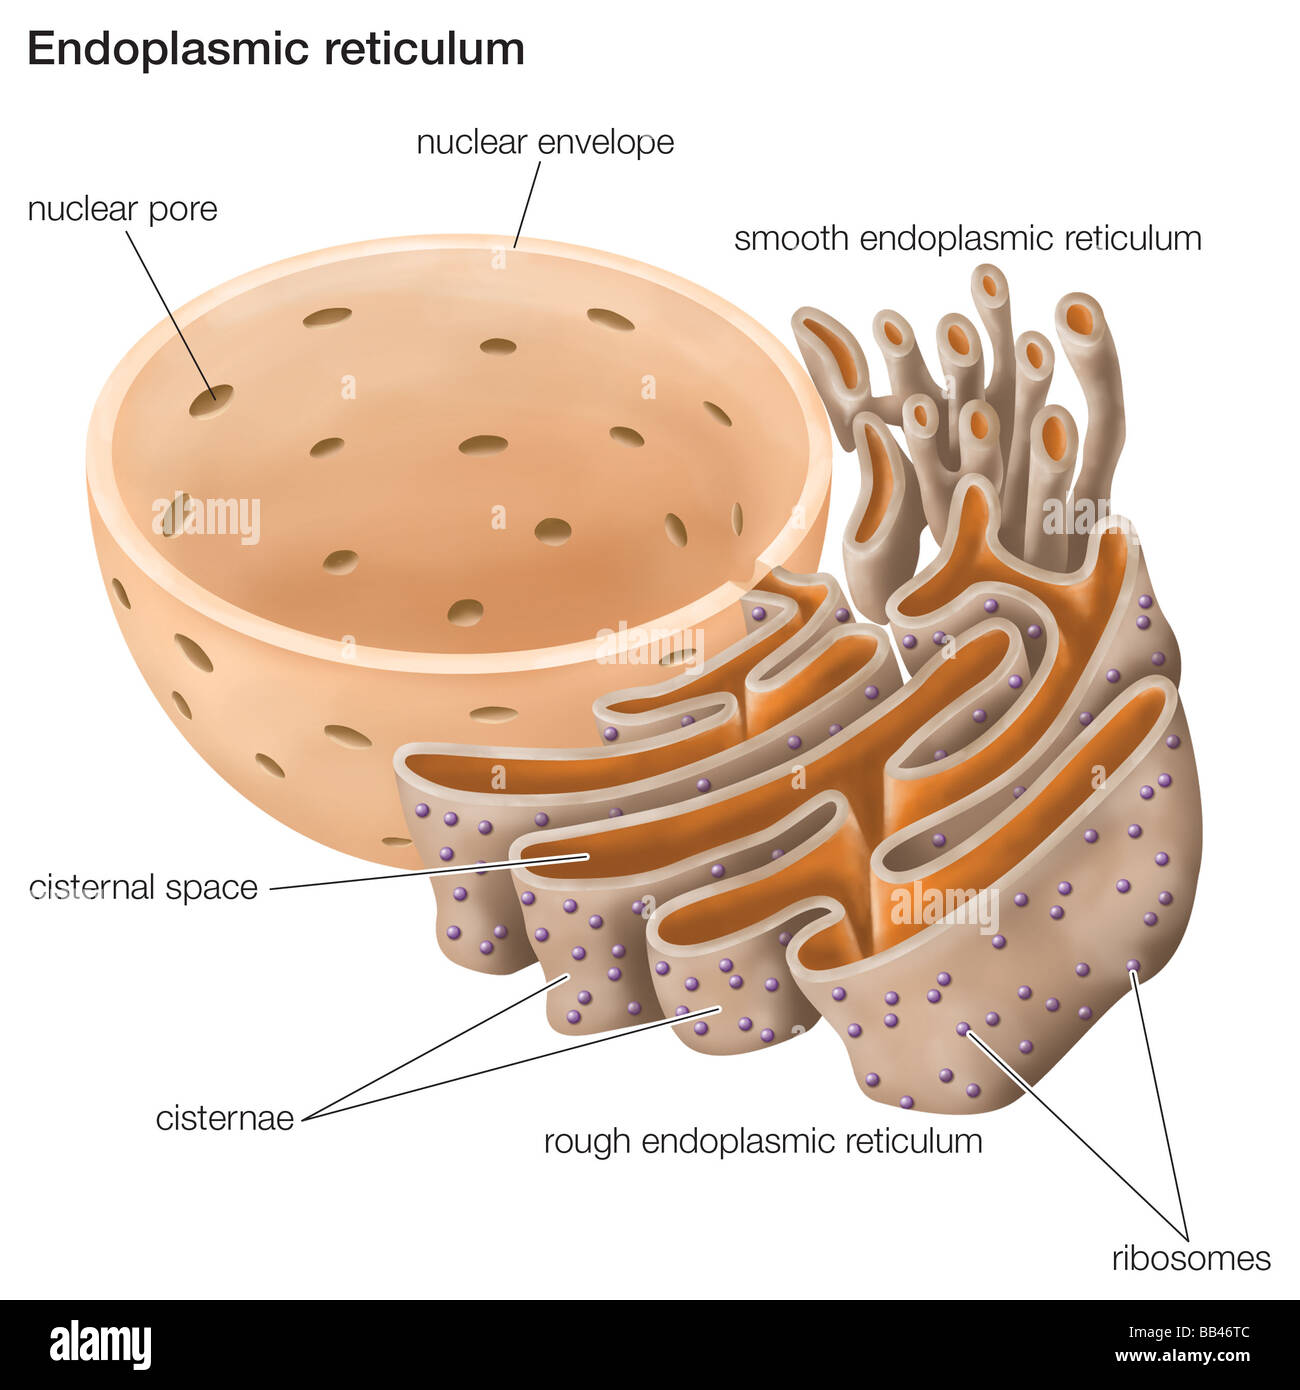 The endoplasmic reticulum plays an important role in the biosynthesis, processing, and transport of proteins and lipids. Stock Photo